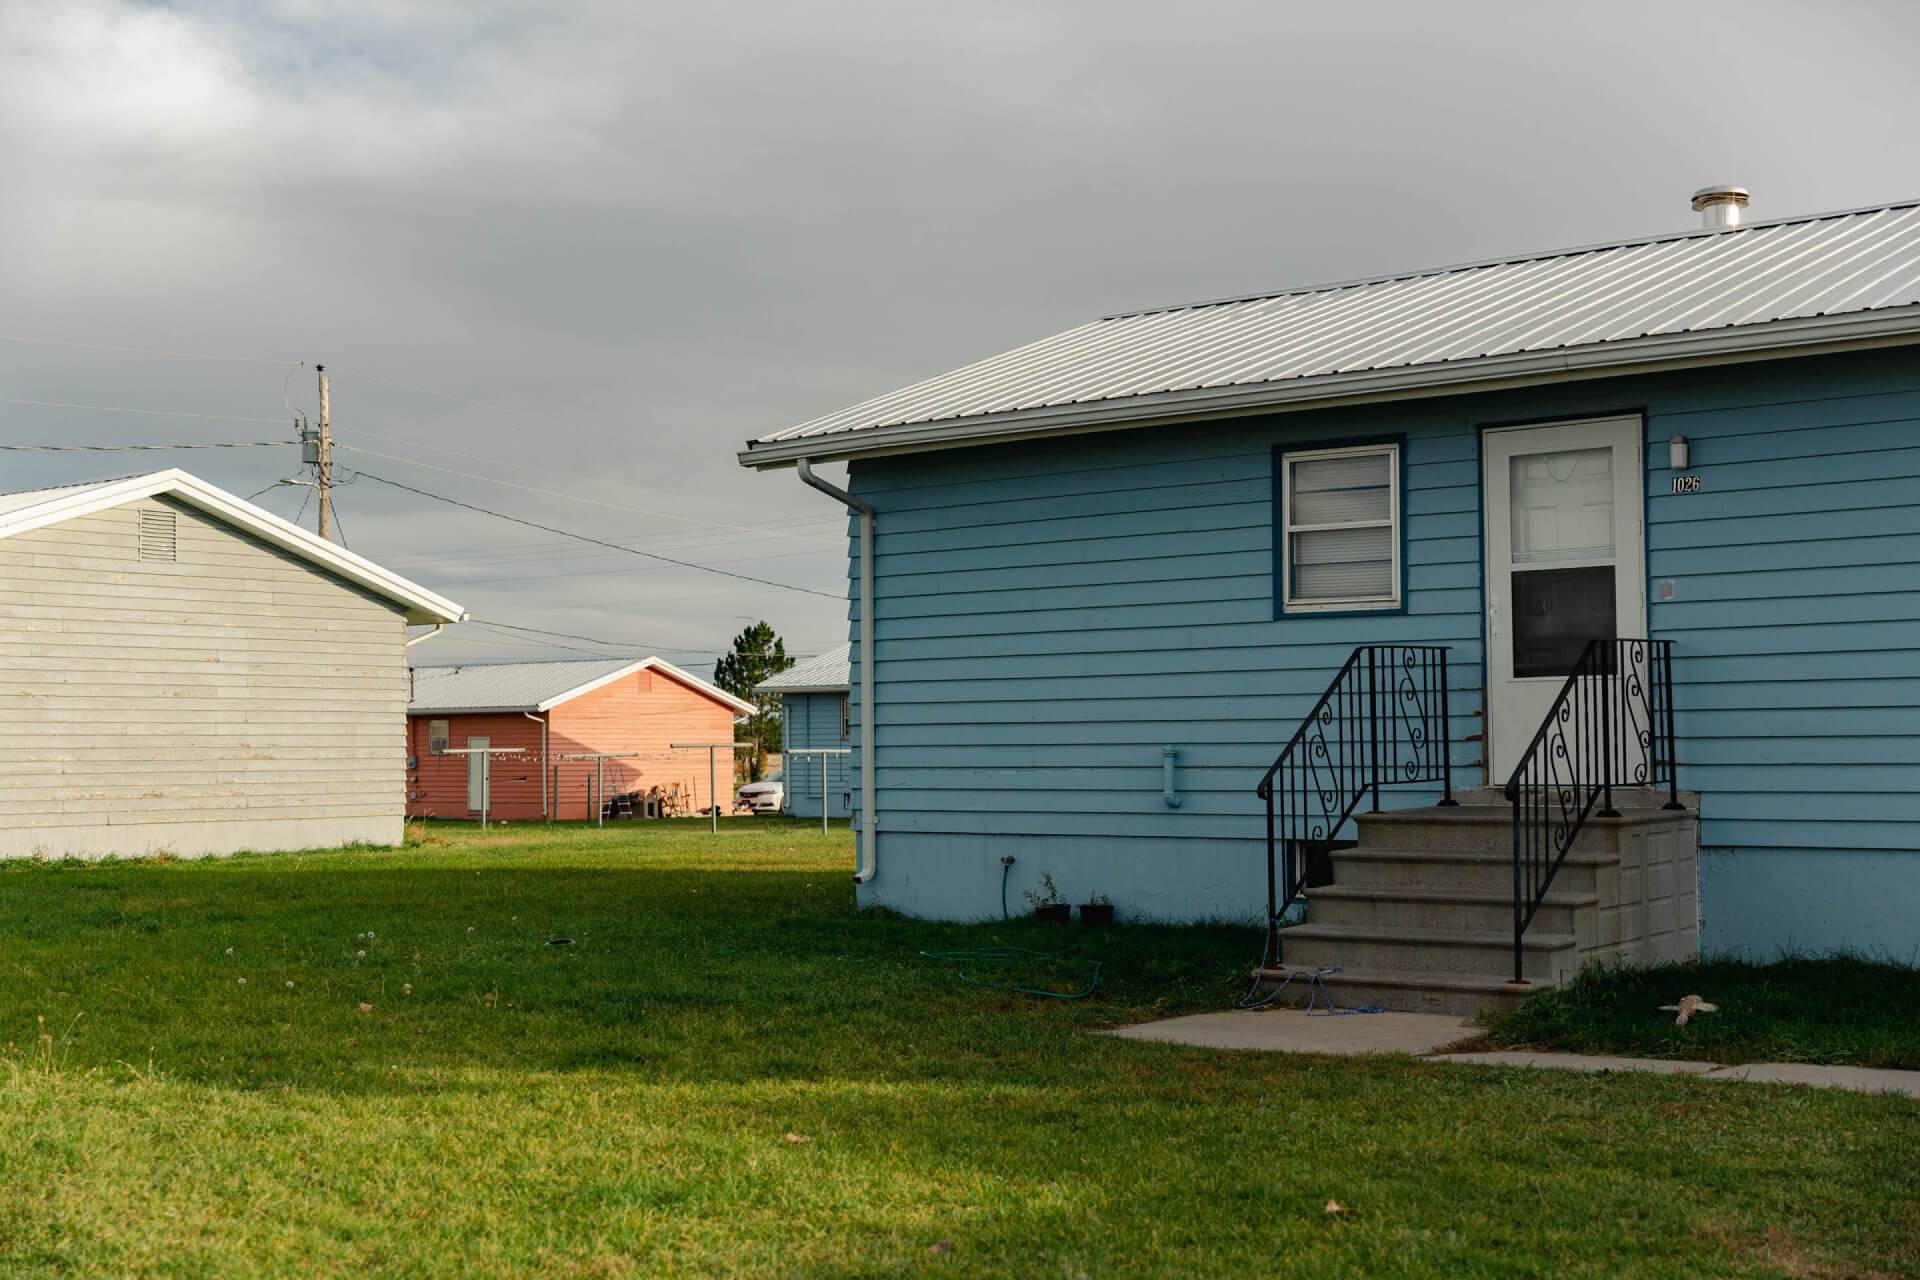 A neighborhood of houses on the reservation